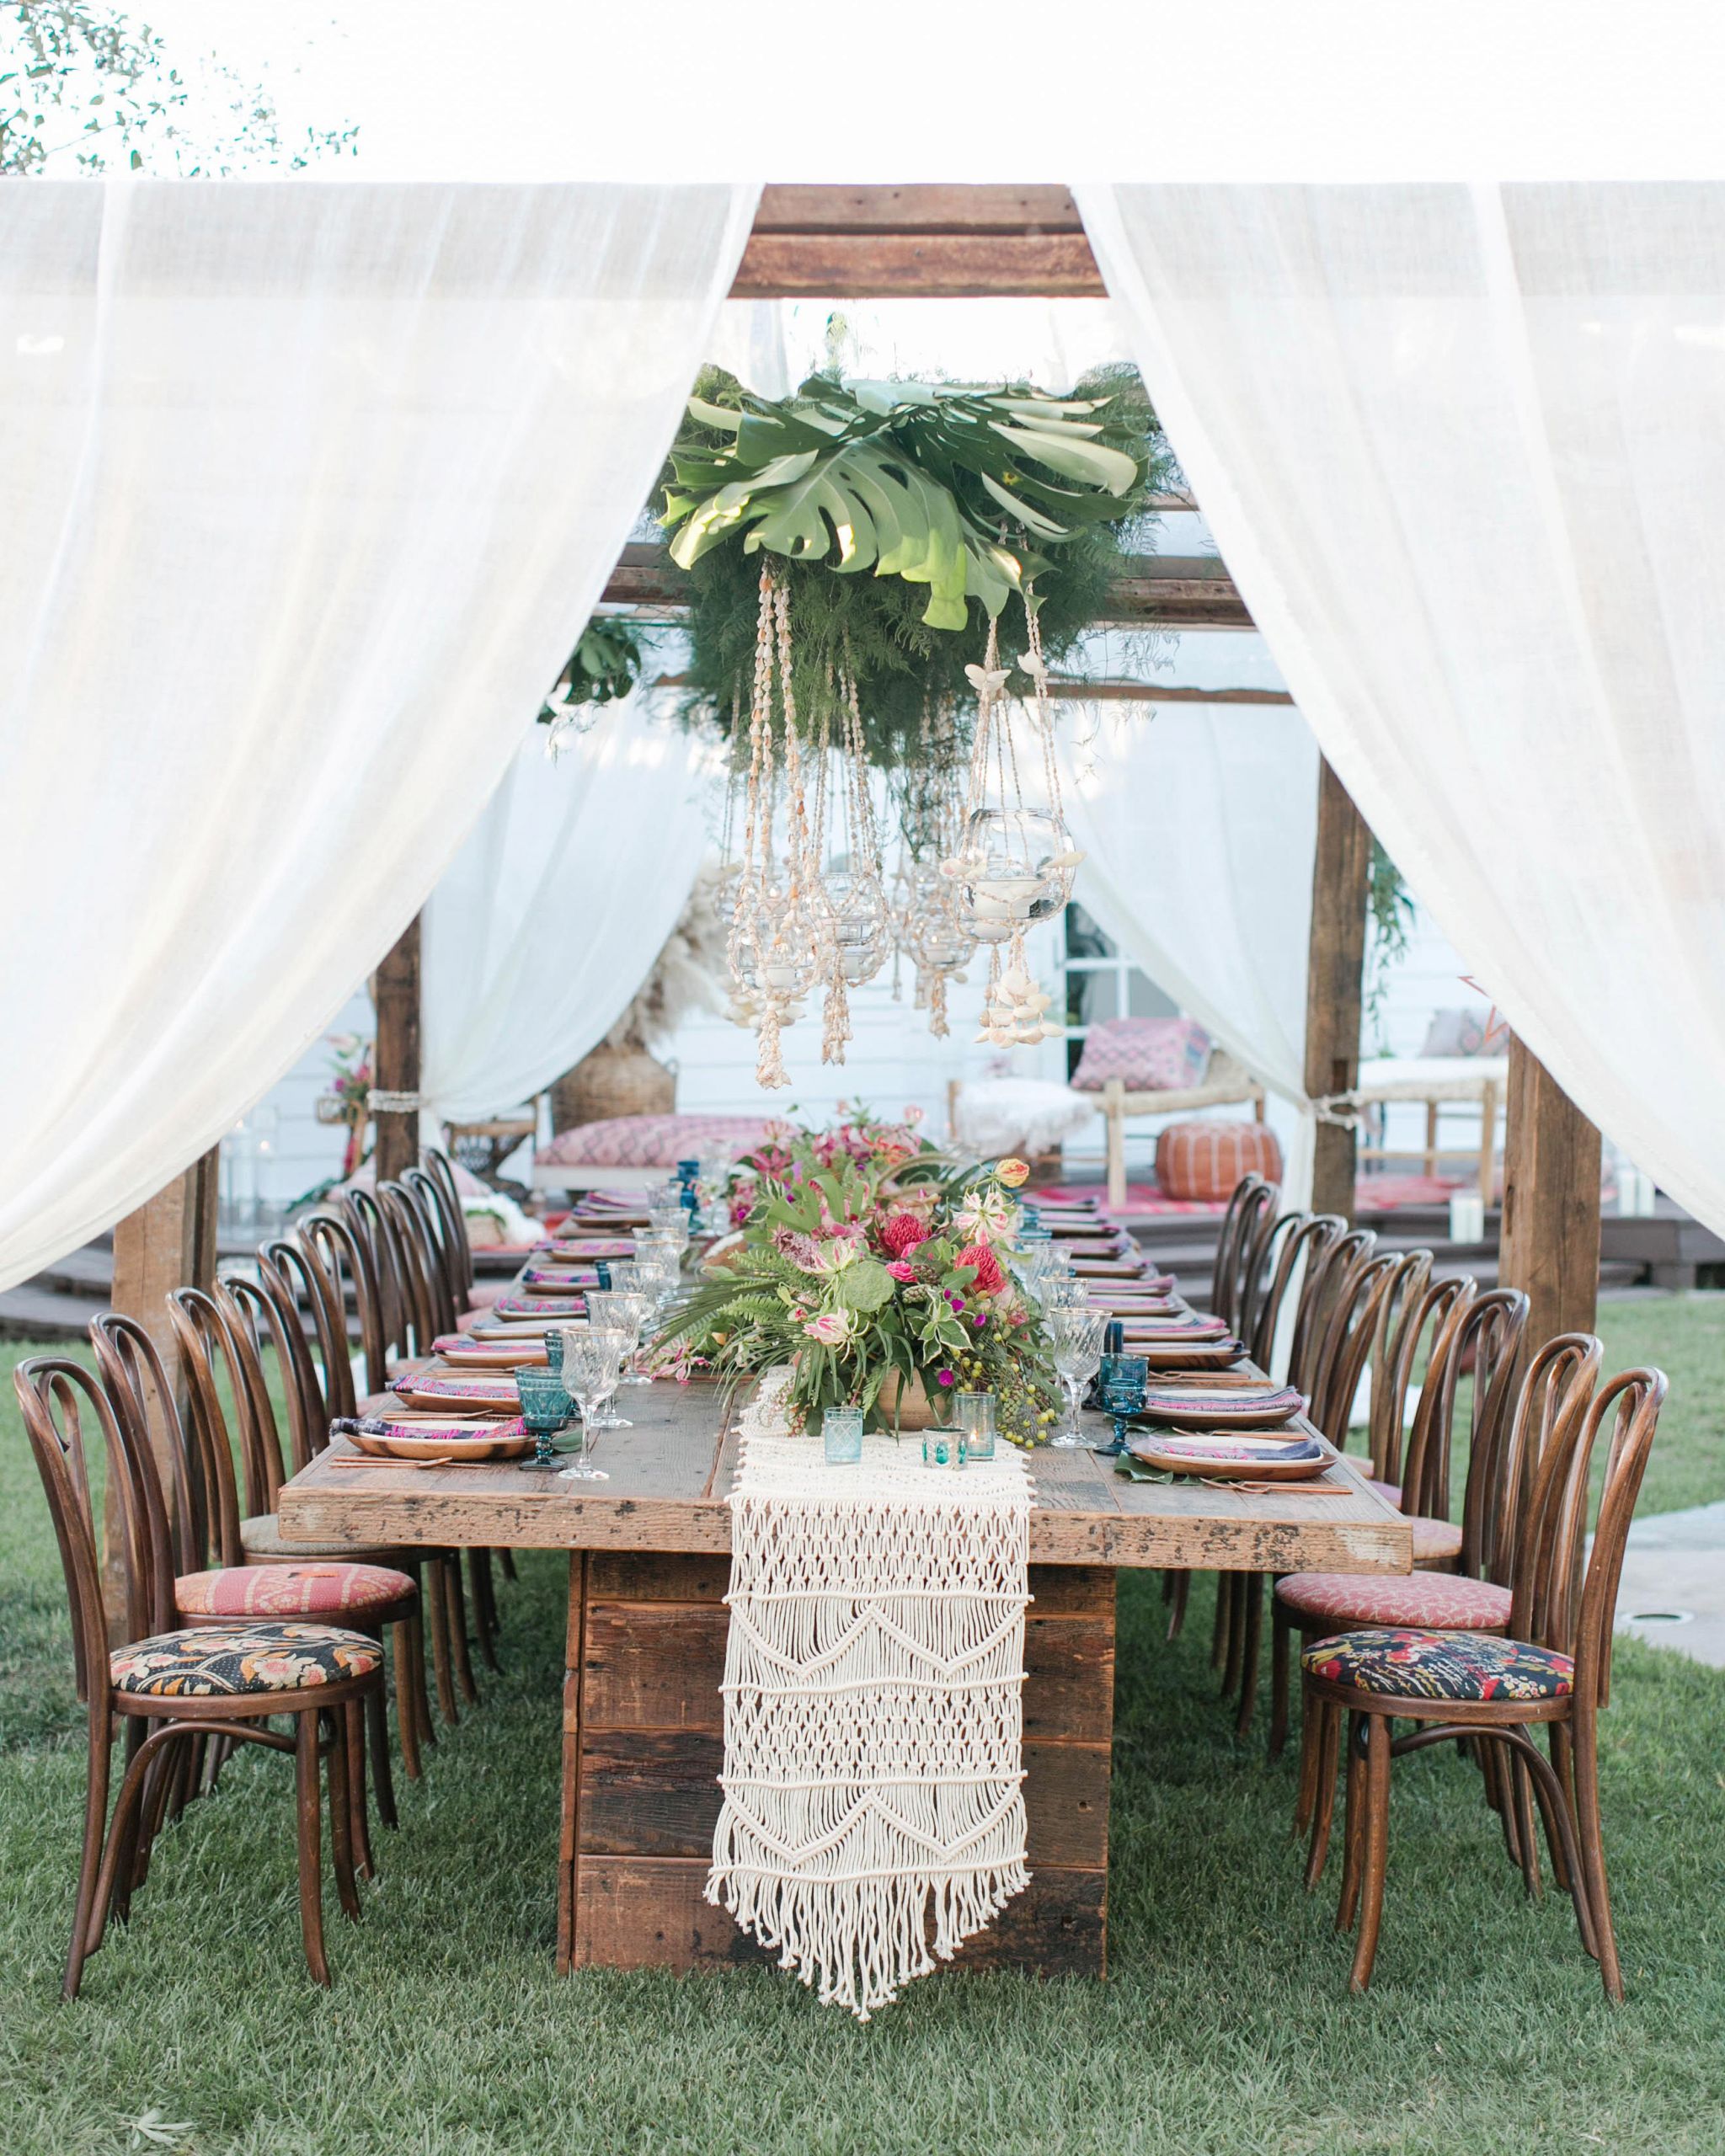 How To Decorate A Tent For A Wedding
 28 Tent Decorating Ideas That Will Upgrade Your Wedding